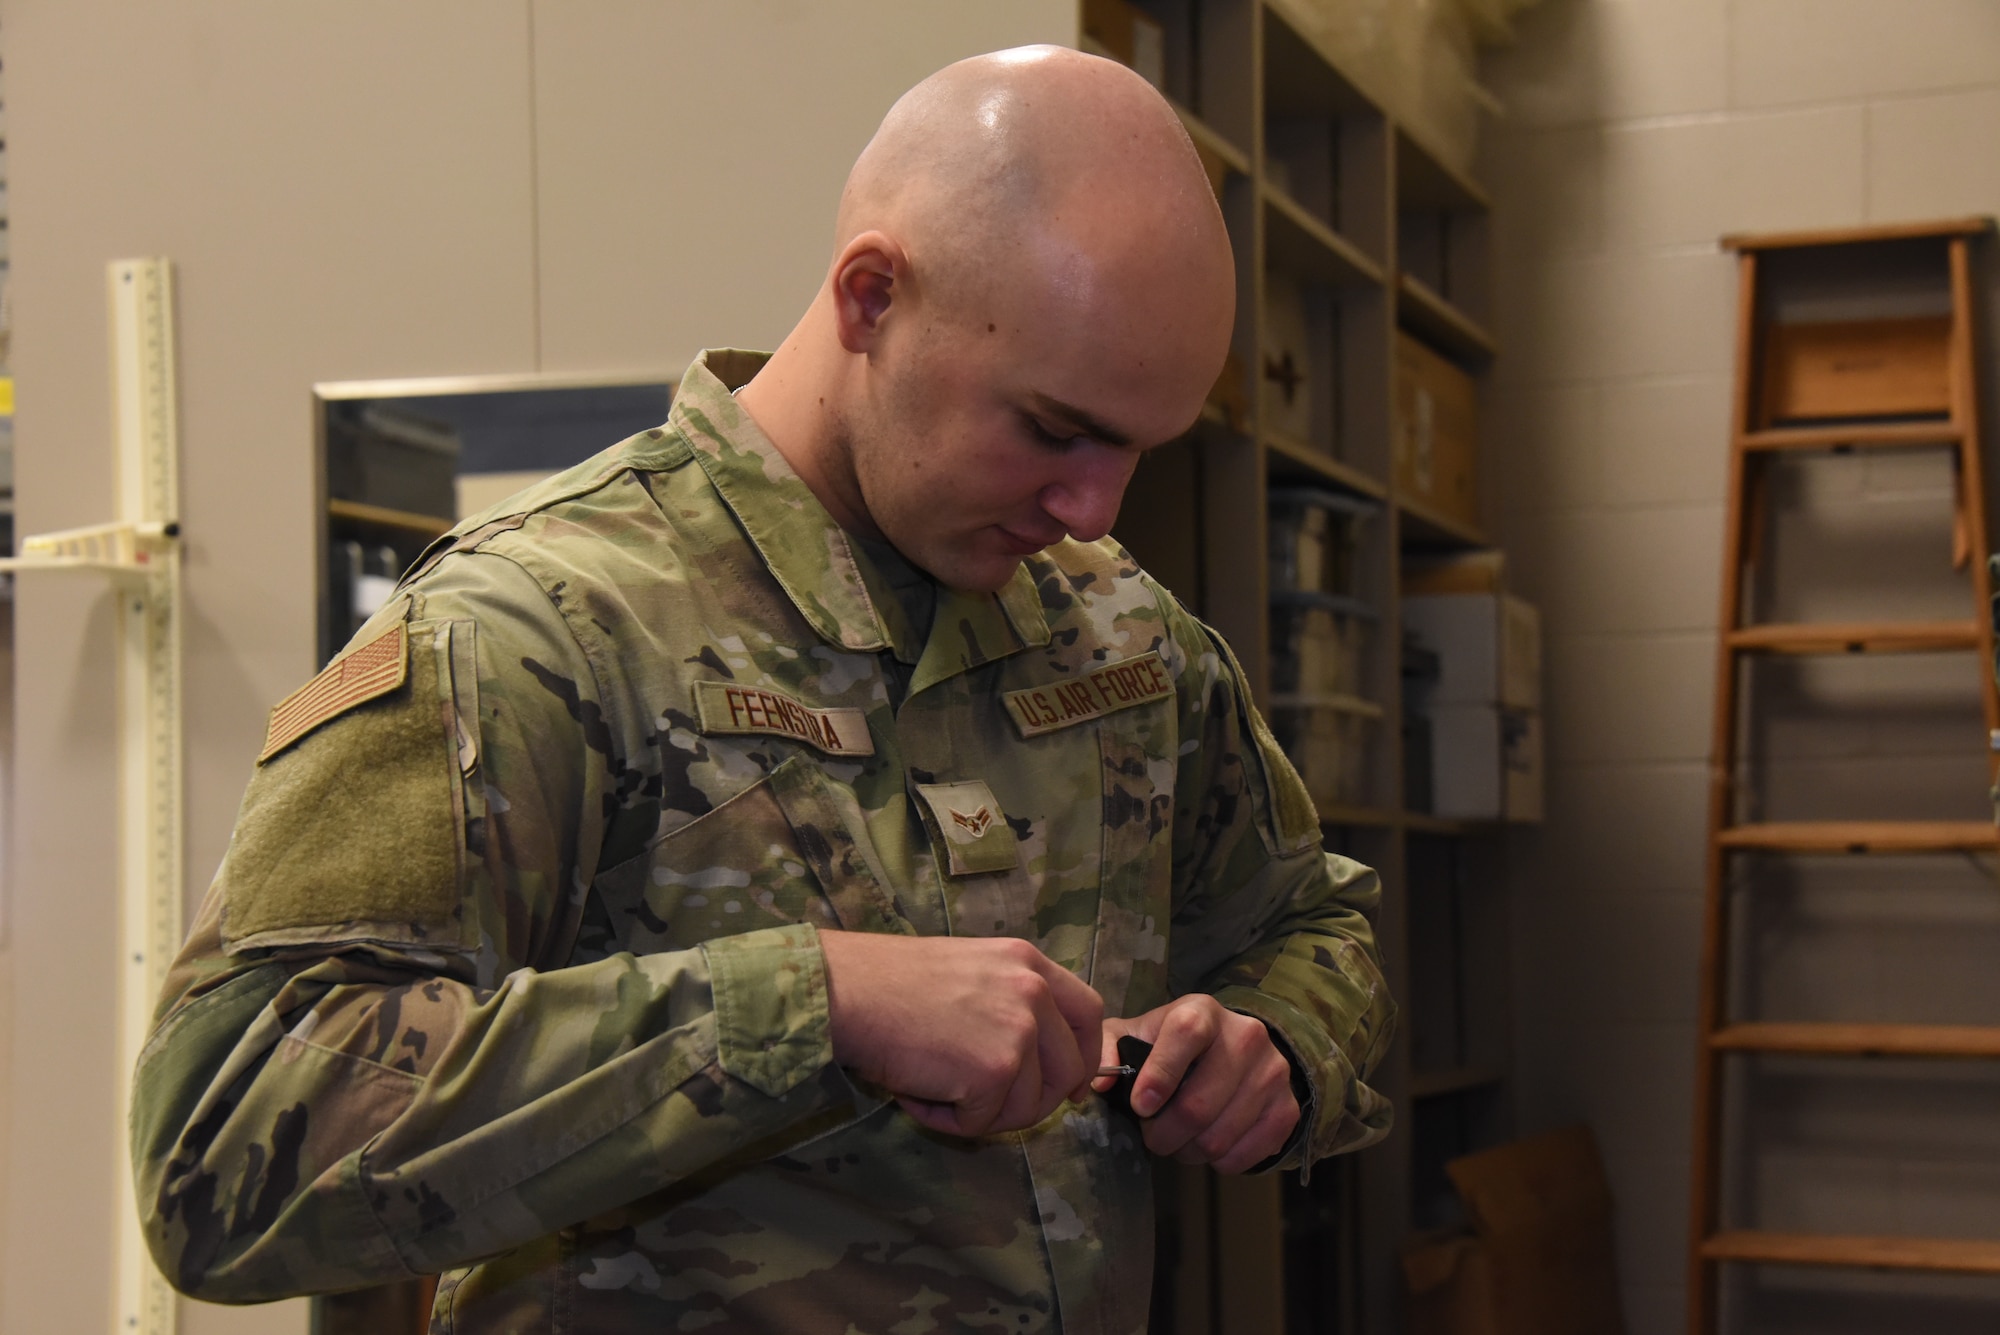 Airman performs maintenance on battery compartment of device